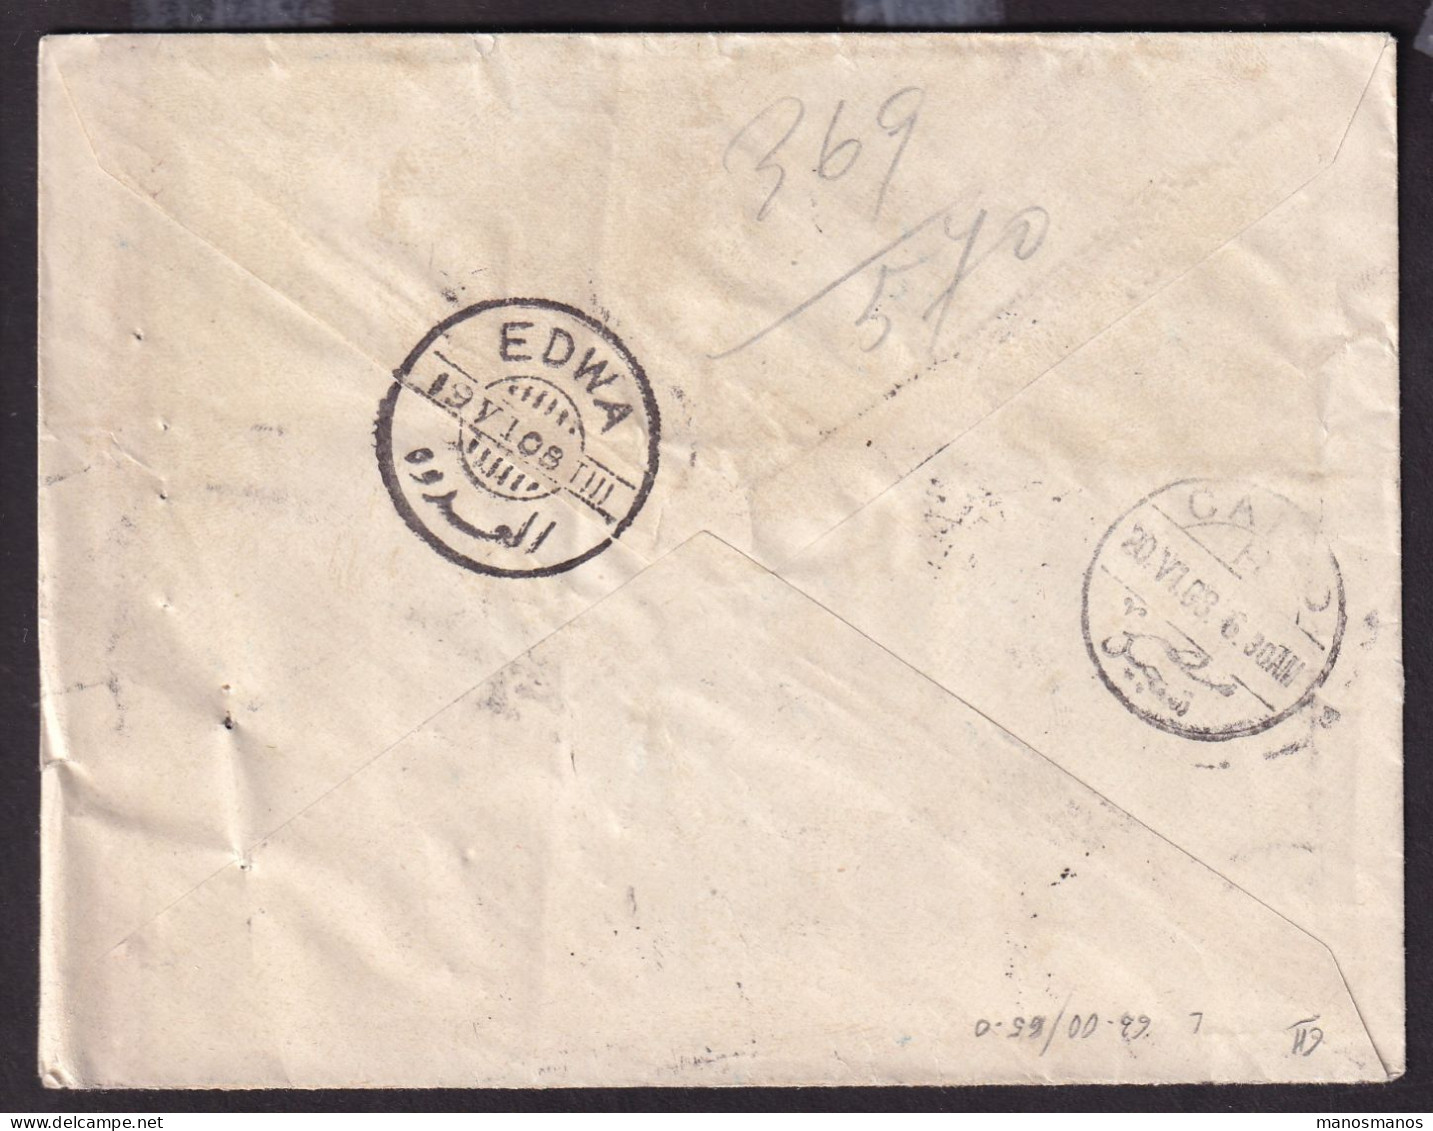 379/31 -- EGYPT TAMIA-EDWA TPO - Registered Cover Cancelled 1908 To CAIRO - TPO Registered Items Are EXTREMELY SCARCE - 1866-1914 Khedivate Of Egypt